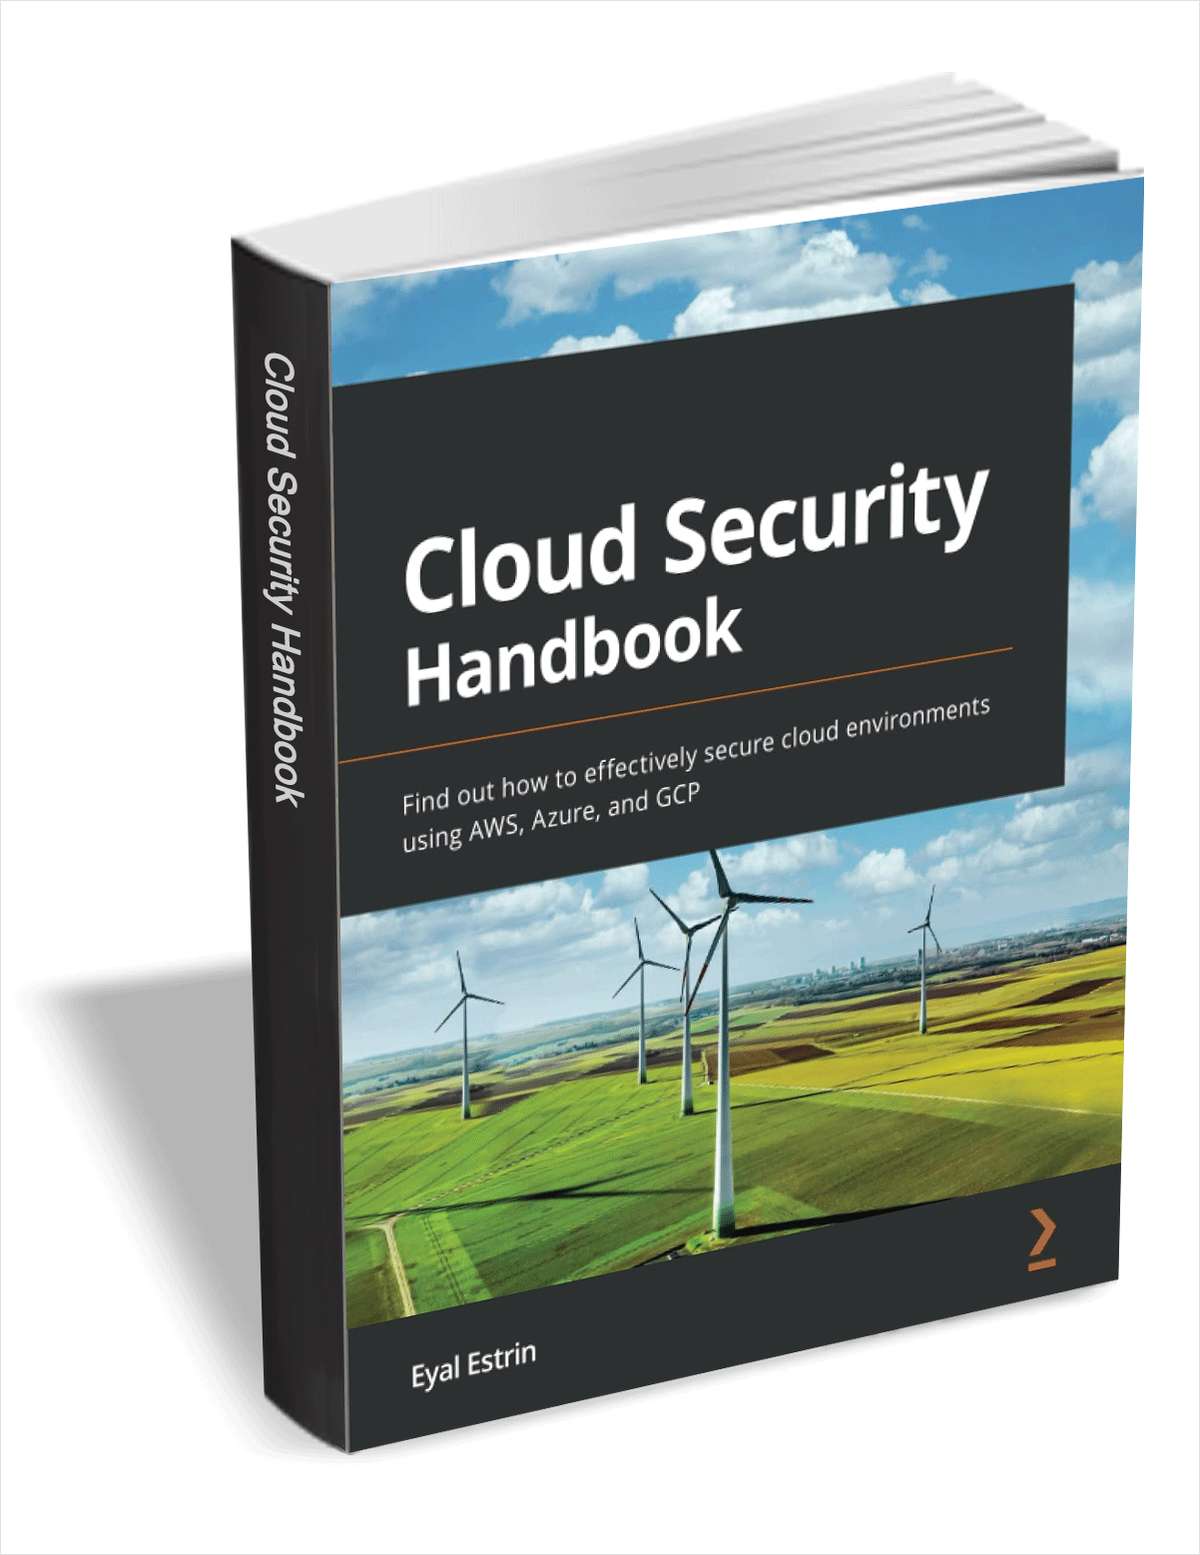 Cloud Security Handbook ($41.99 Value) FREE for a Limited Time